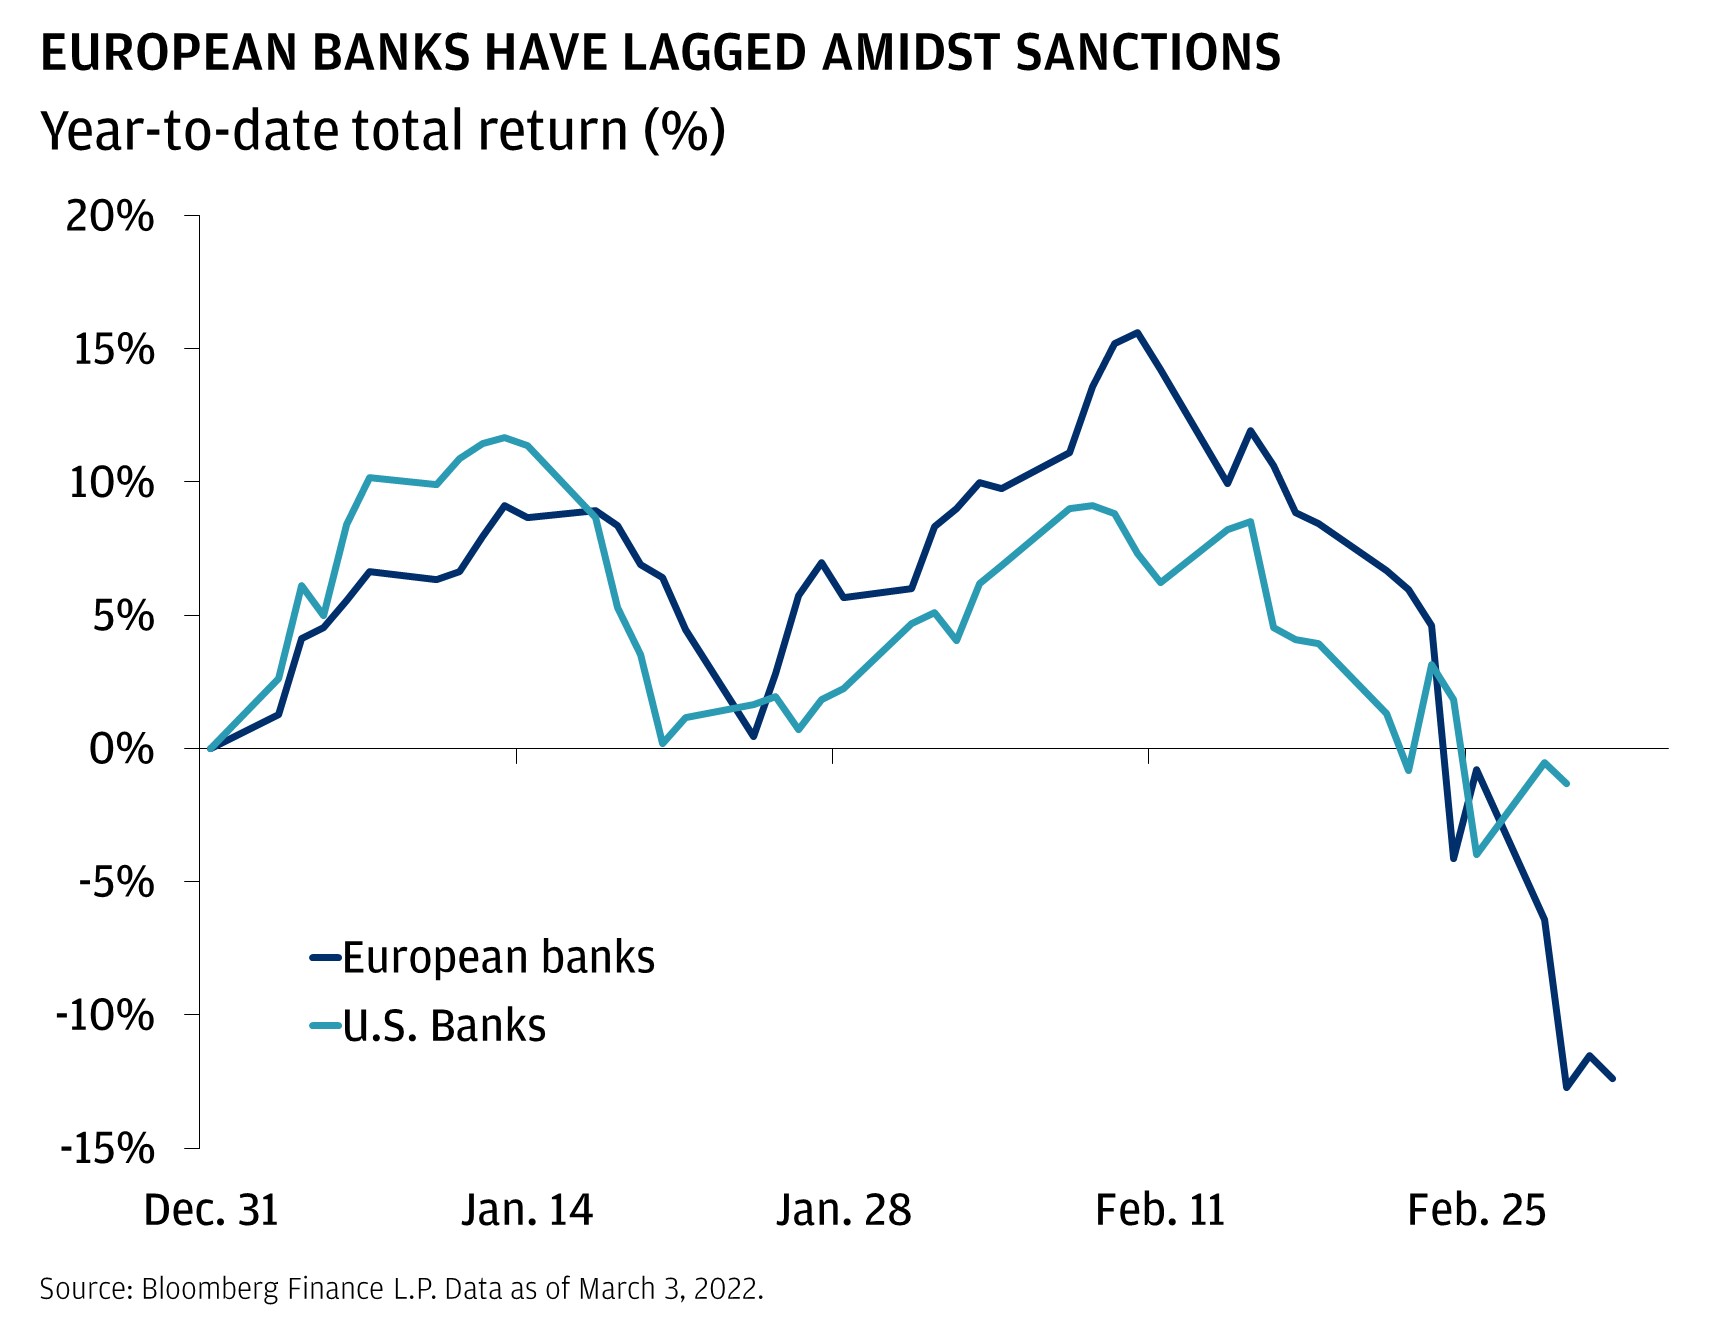 This chart shows the year-to-date return of European and U.S. banks, from December 31, 2021, to February 25, 2022. EUROPEAN BANKS HAVE LAGGED AMIDST SANCTIONS